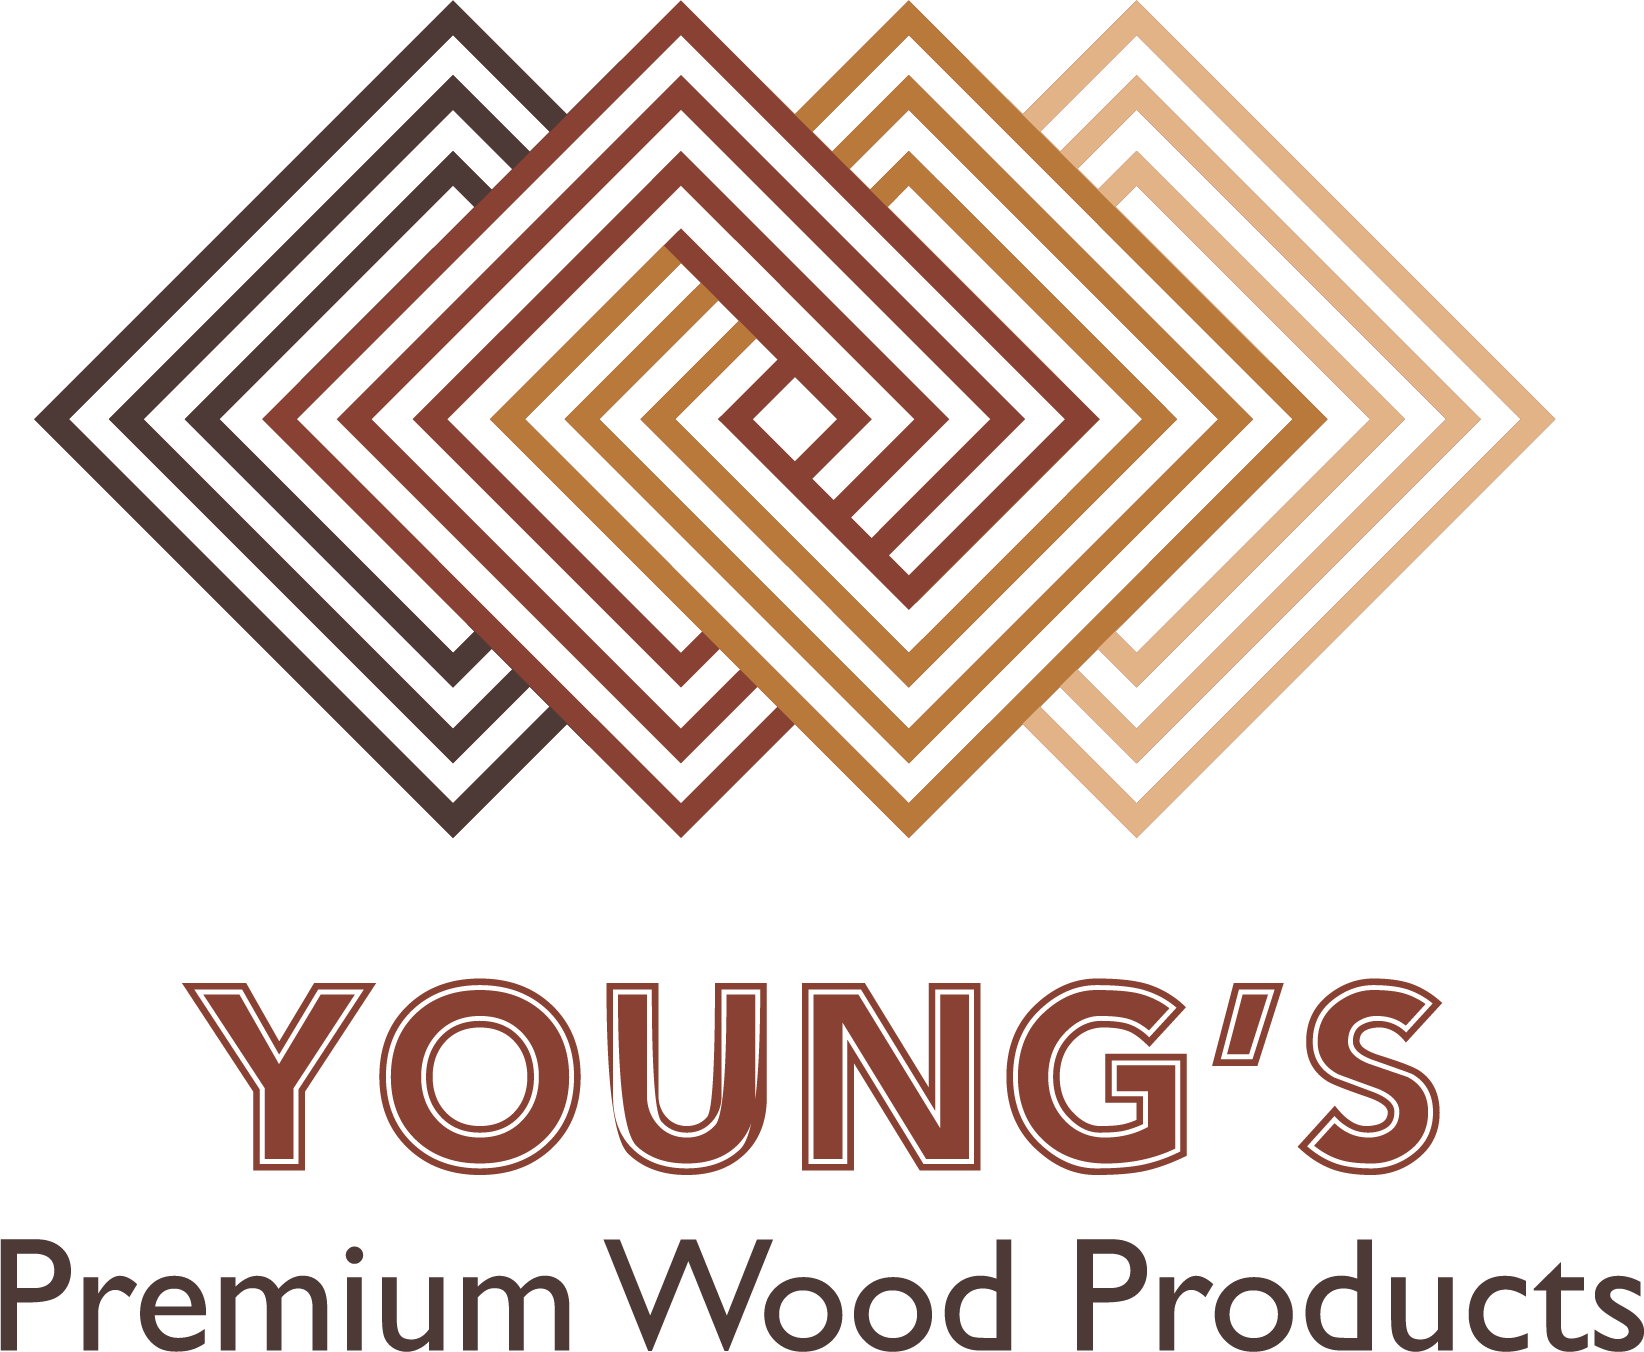 Youngs Premium Wood Products